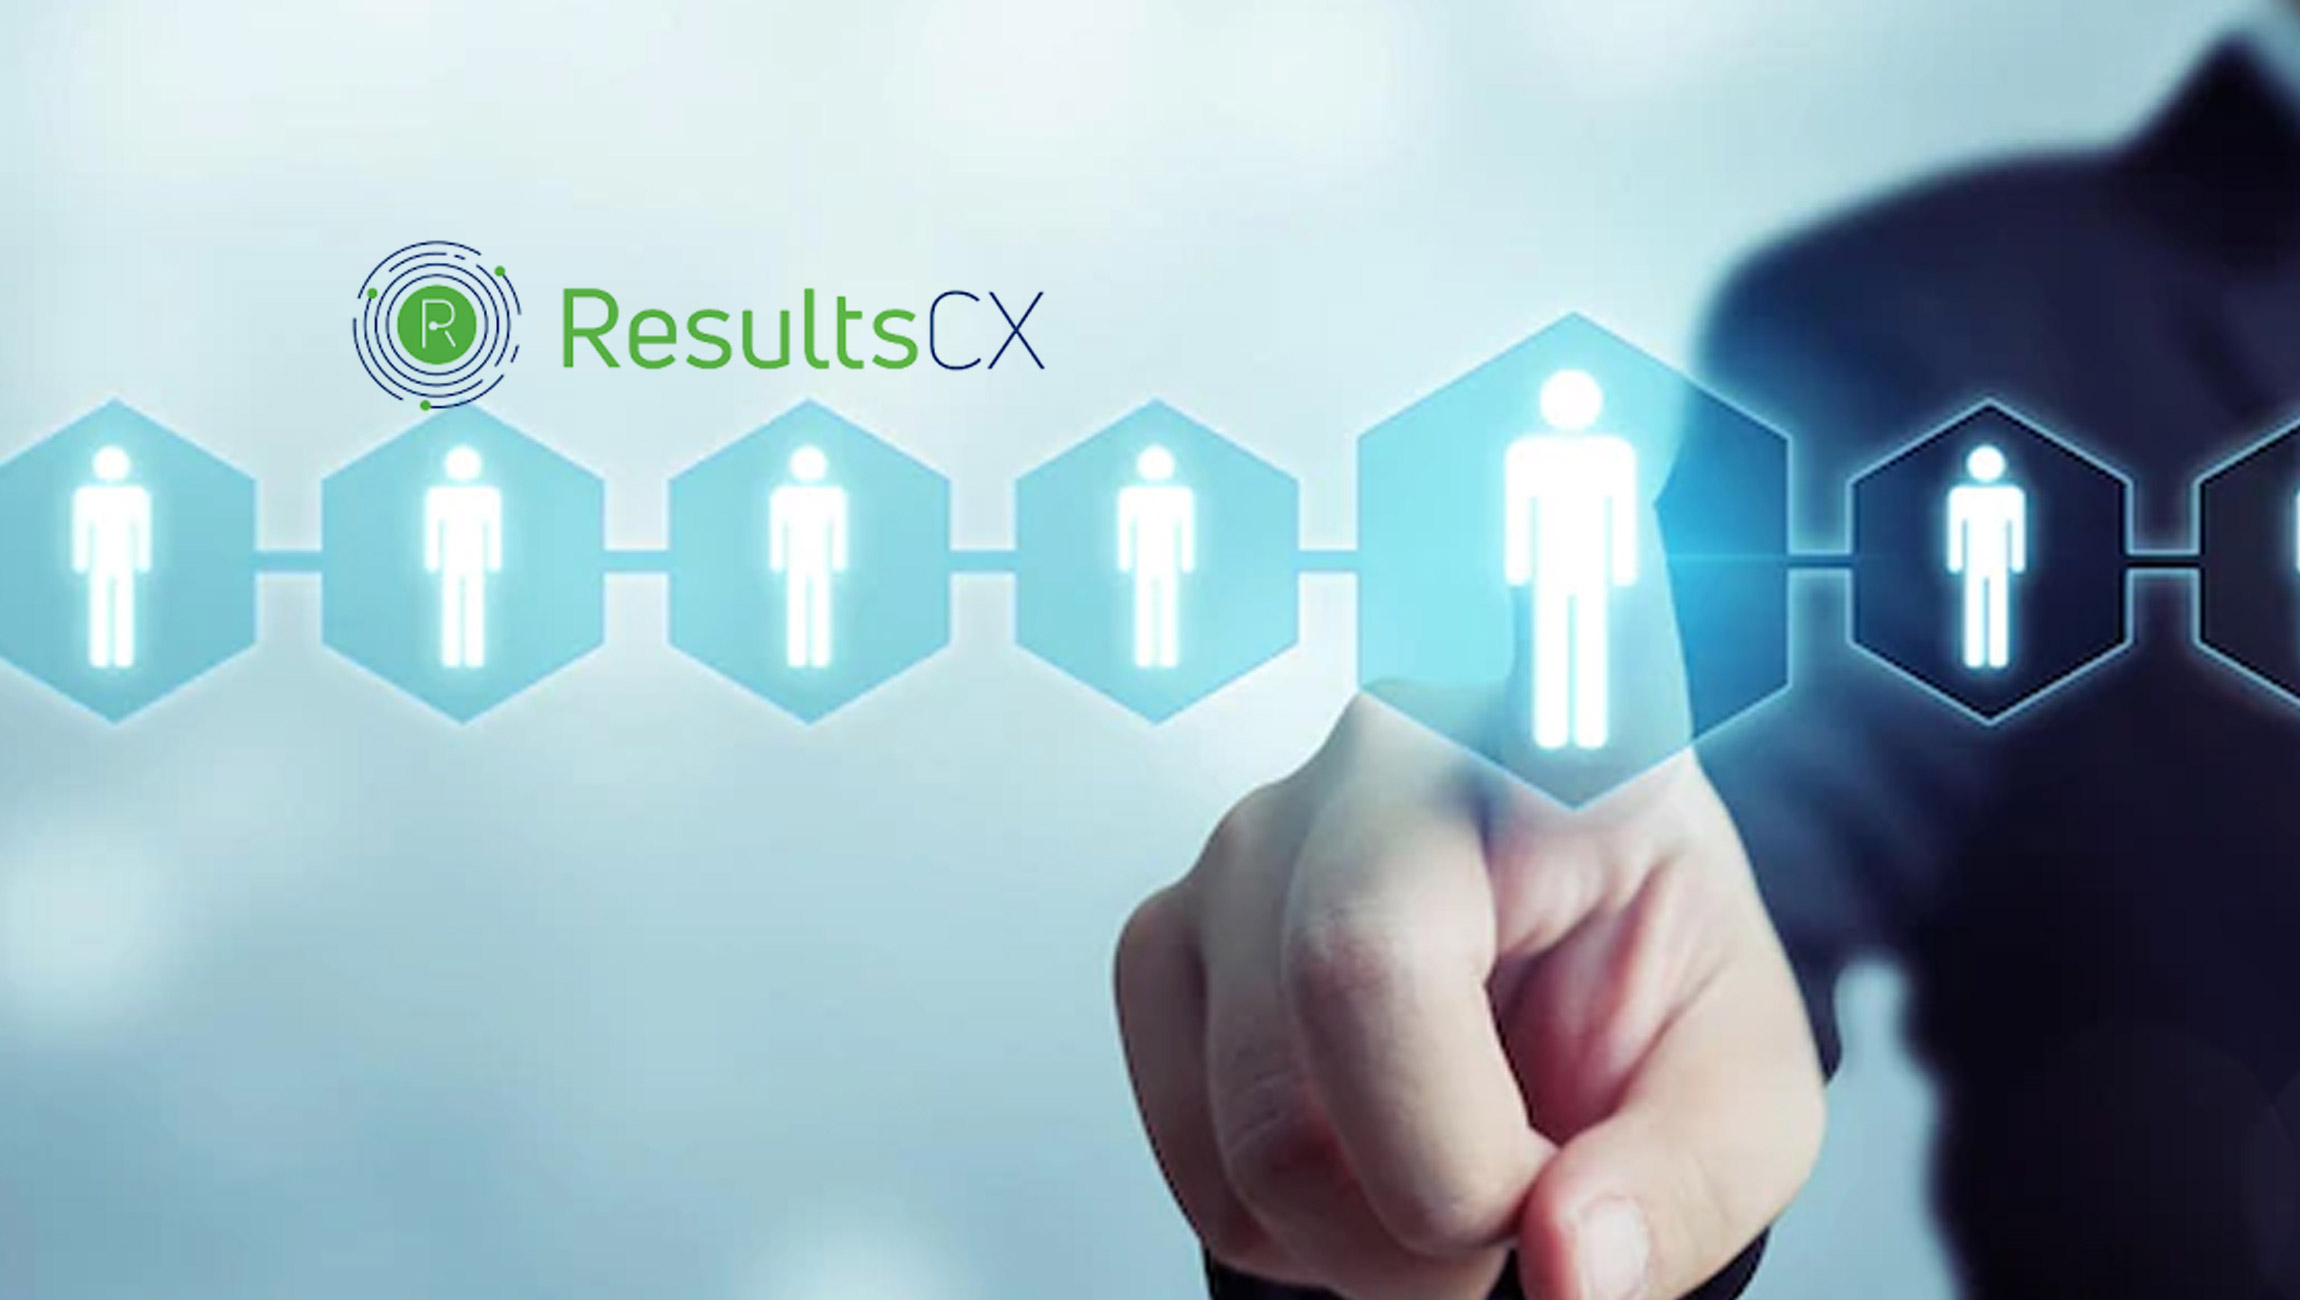 ResultsCX Announces Rajesh Subramaniam As Its New CEO